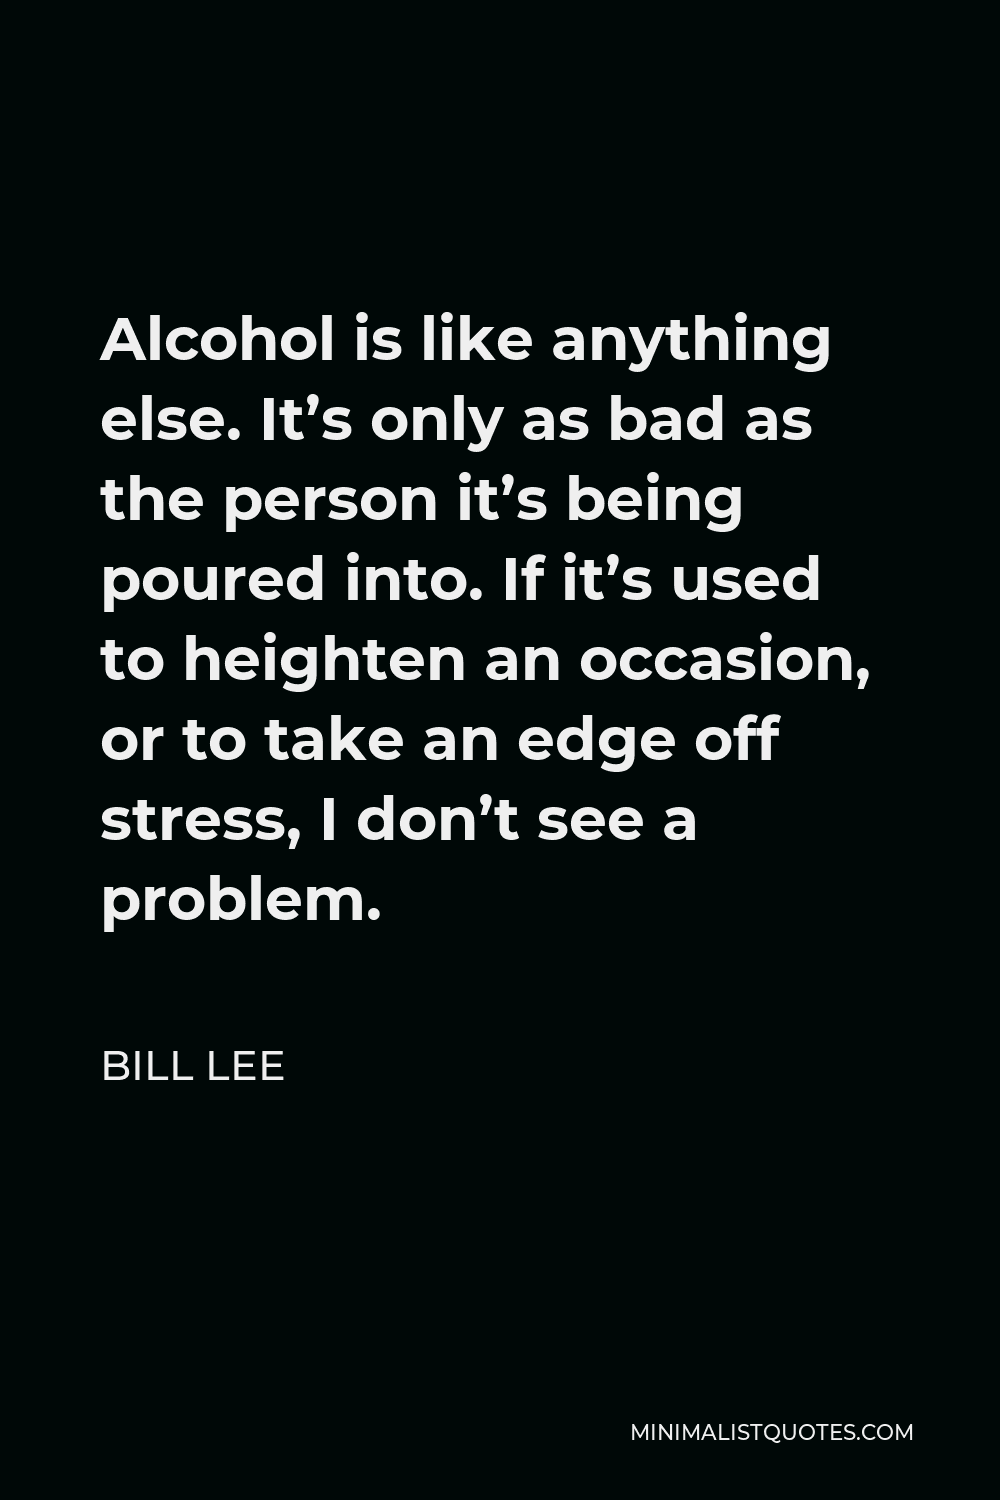 Bill Lee Quote - Alcohol is like anything else. It’s only as bad as the person it’s being poured into. If it’s used to heighten an occasion, or to take an edge off stress, I don’t see a problem.